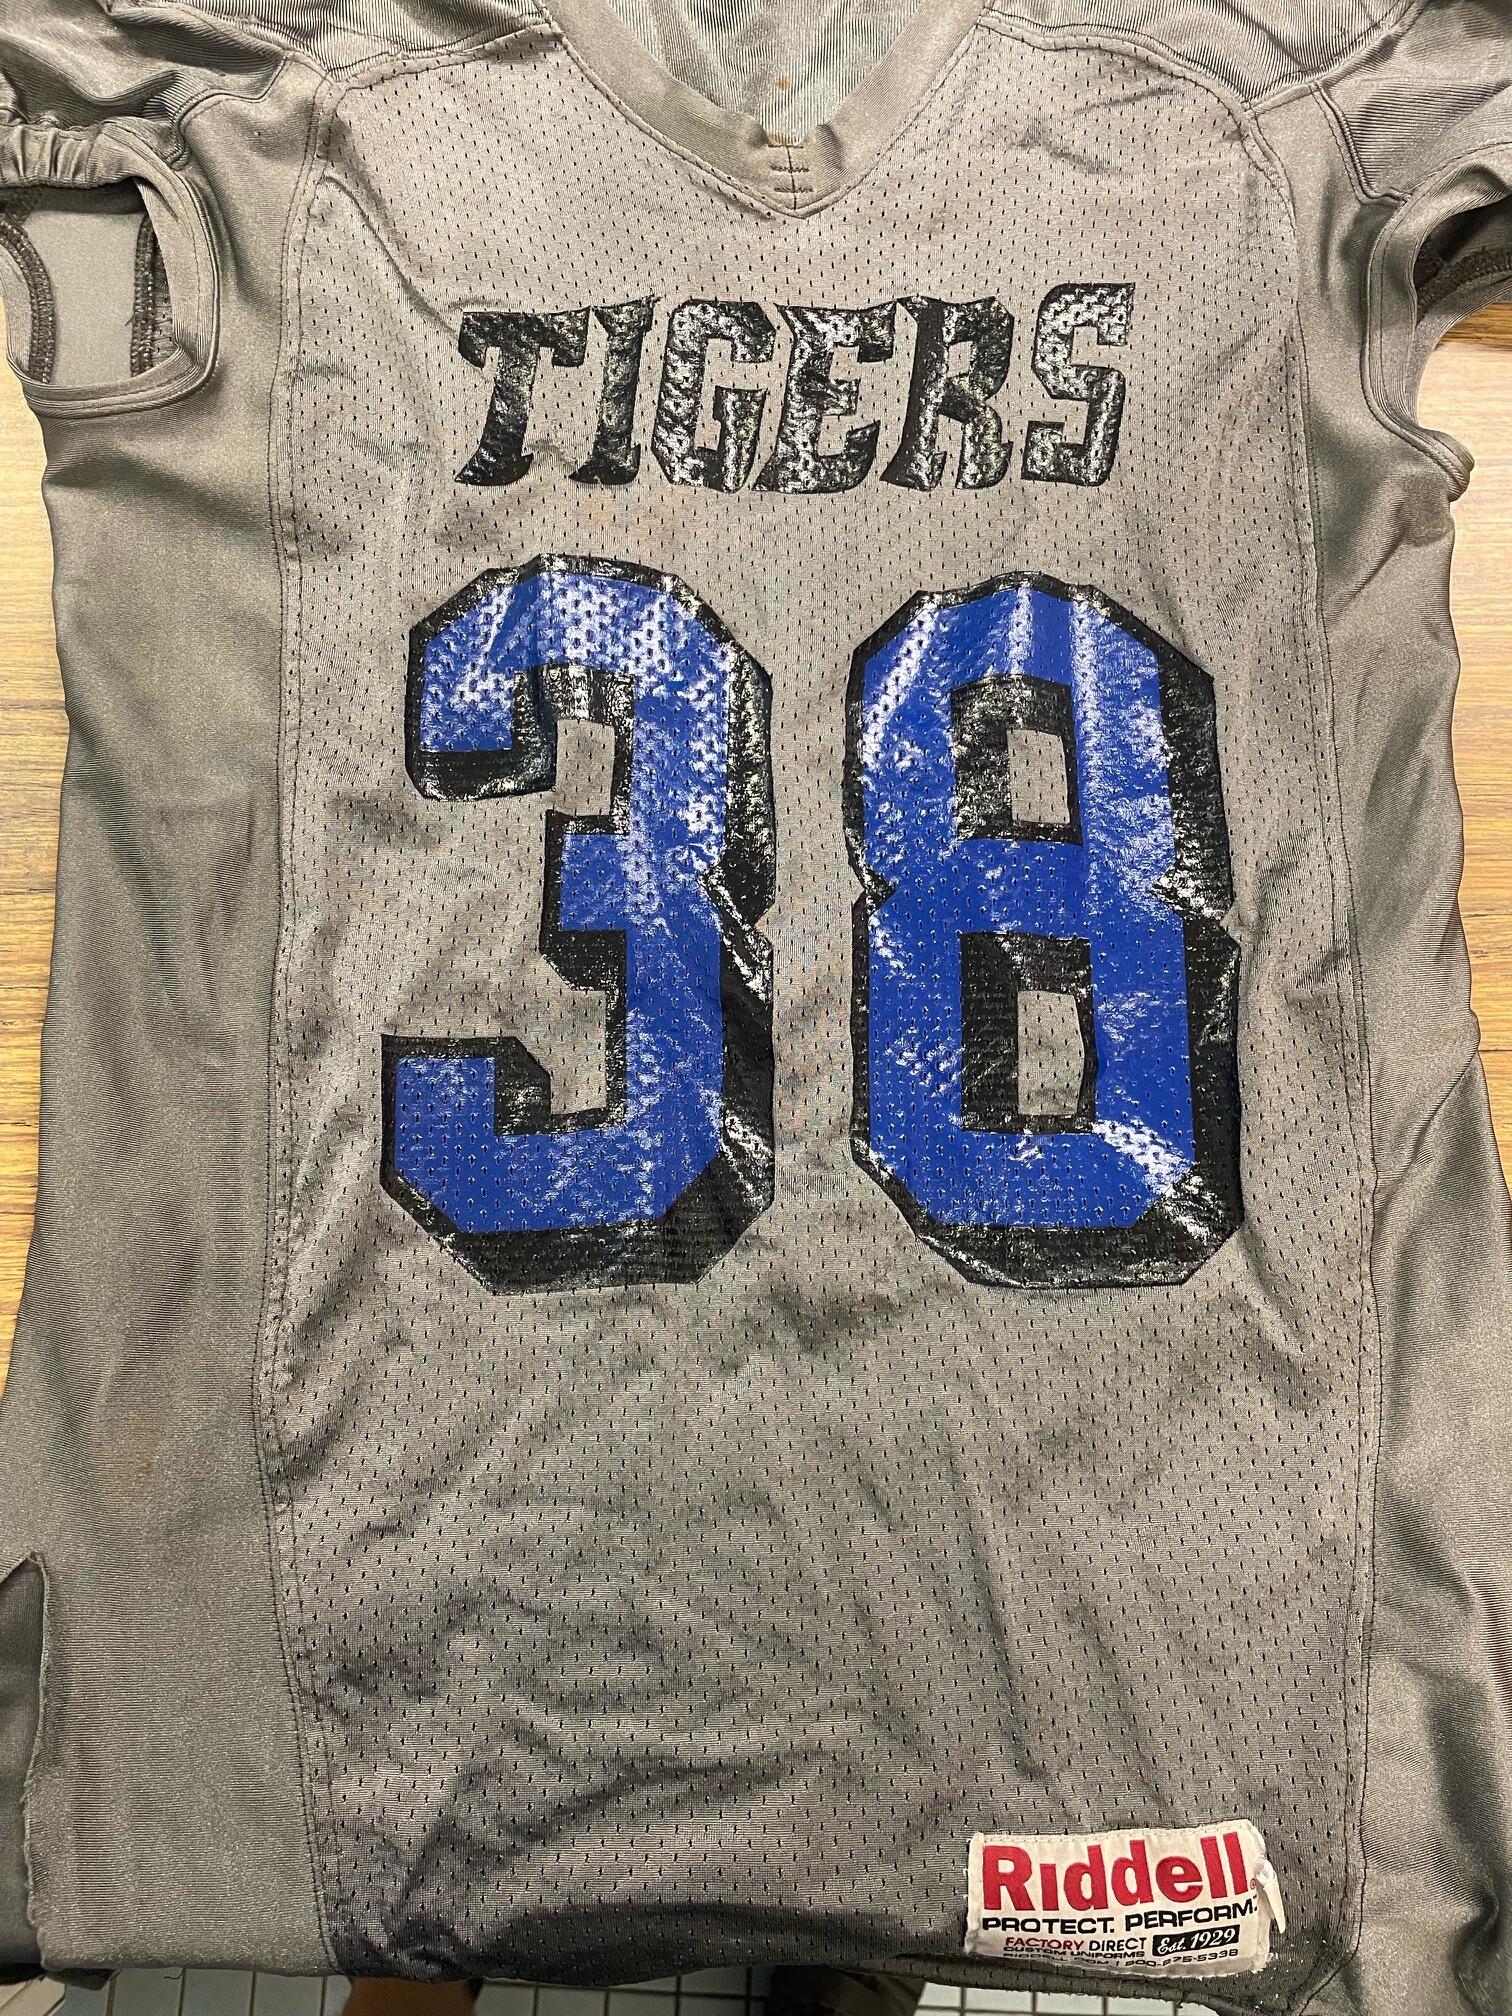 Old football jersey front